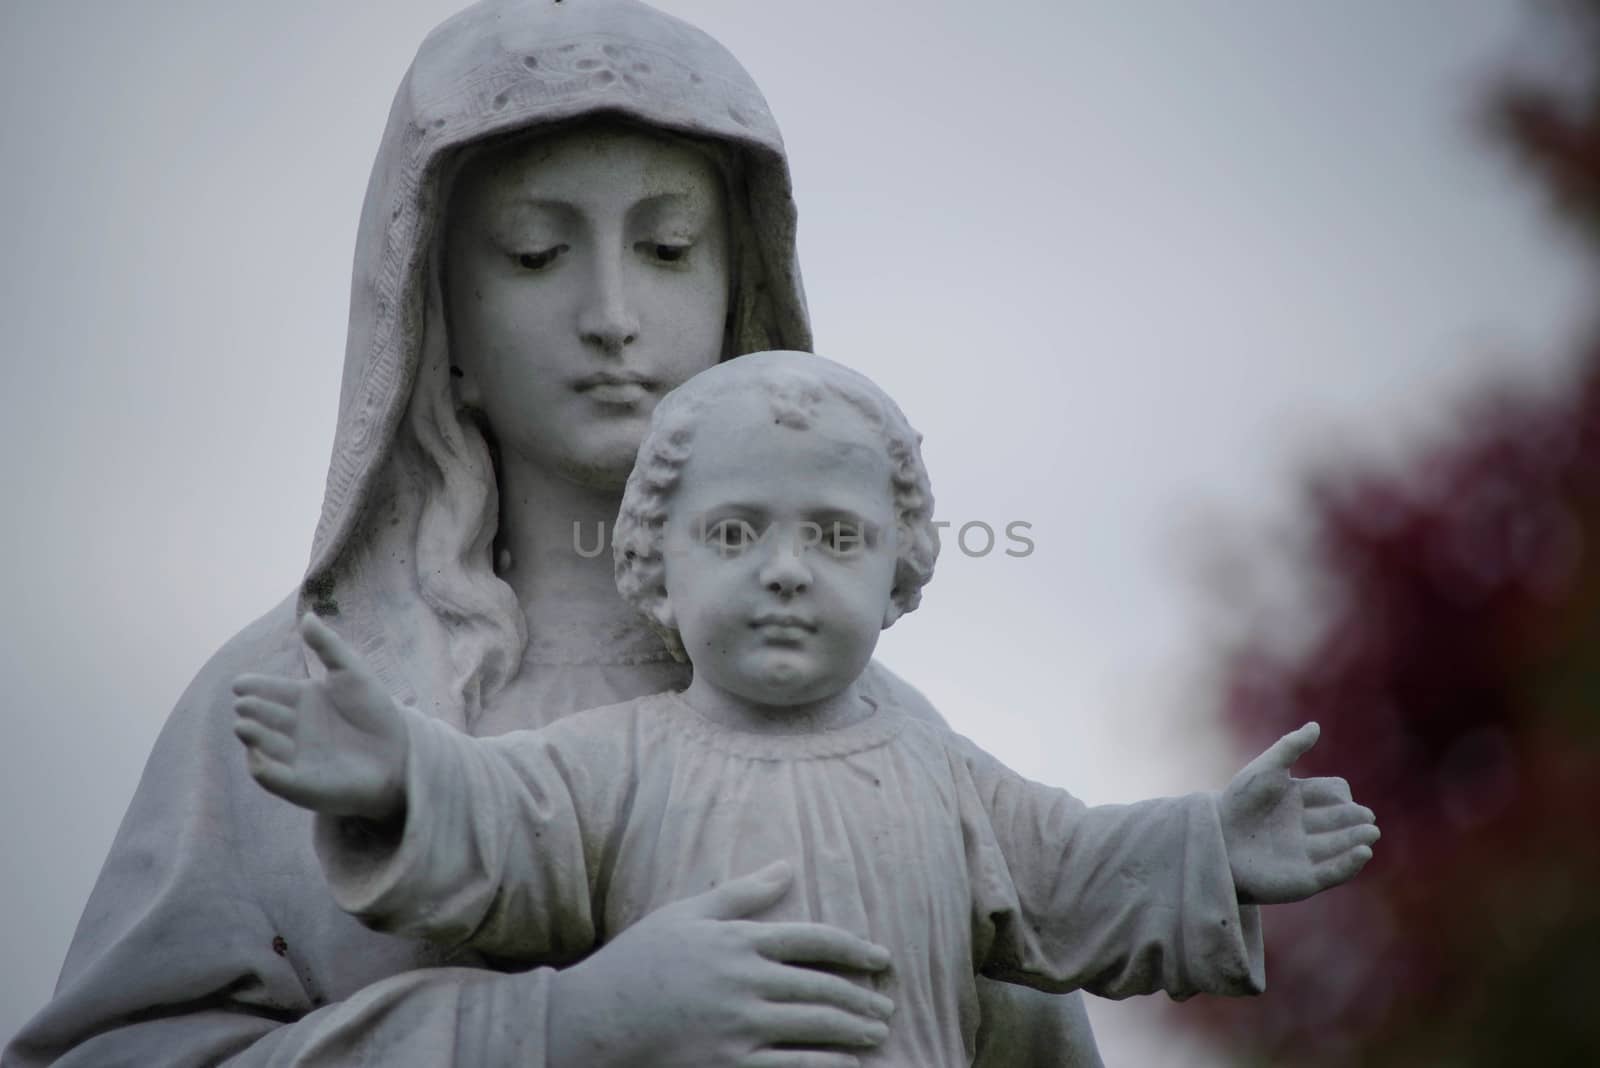 Beautiful old cemetery statue of Mary and Jesus as the Christ Child, defocused background with copy space.